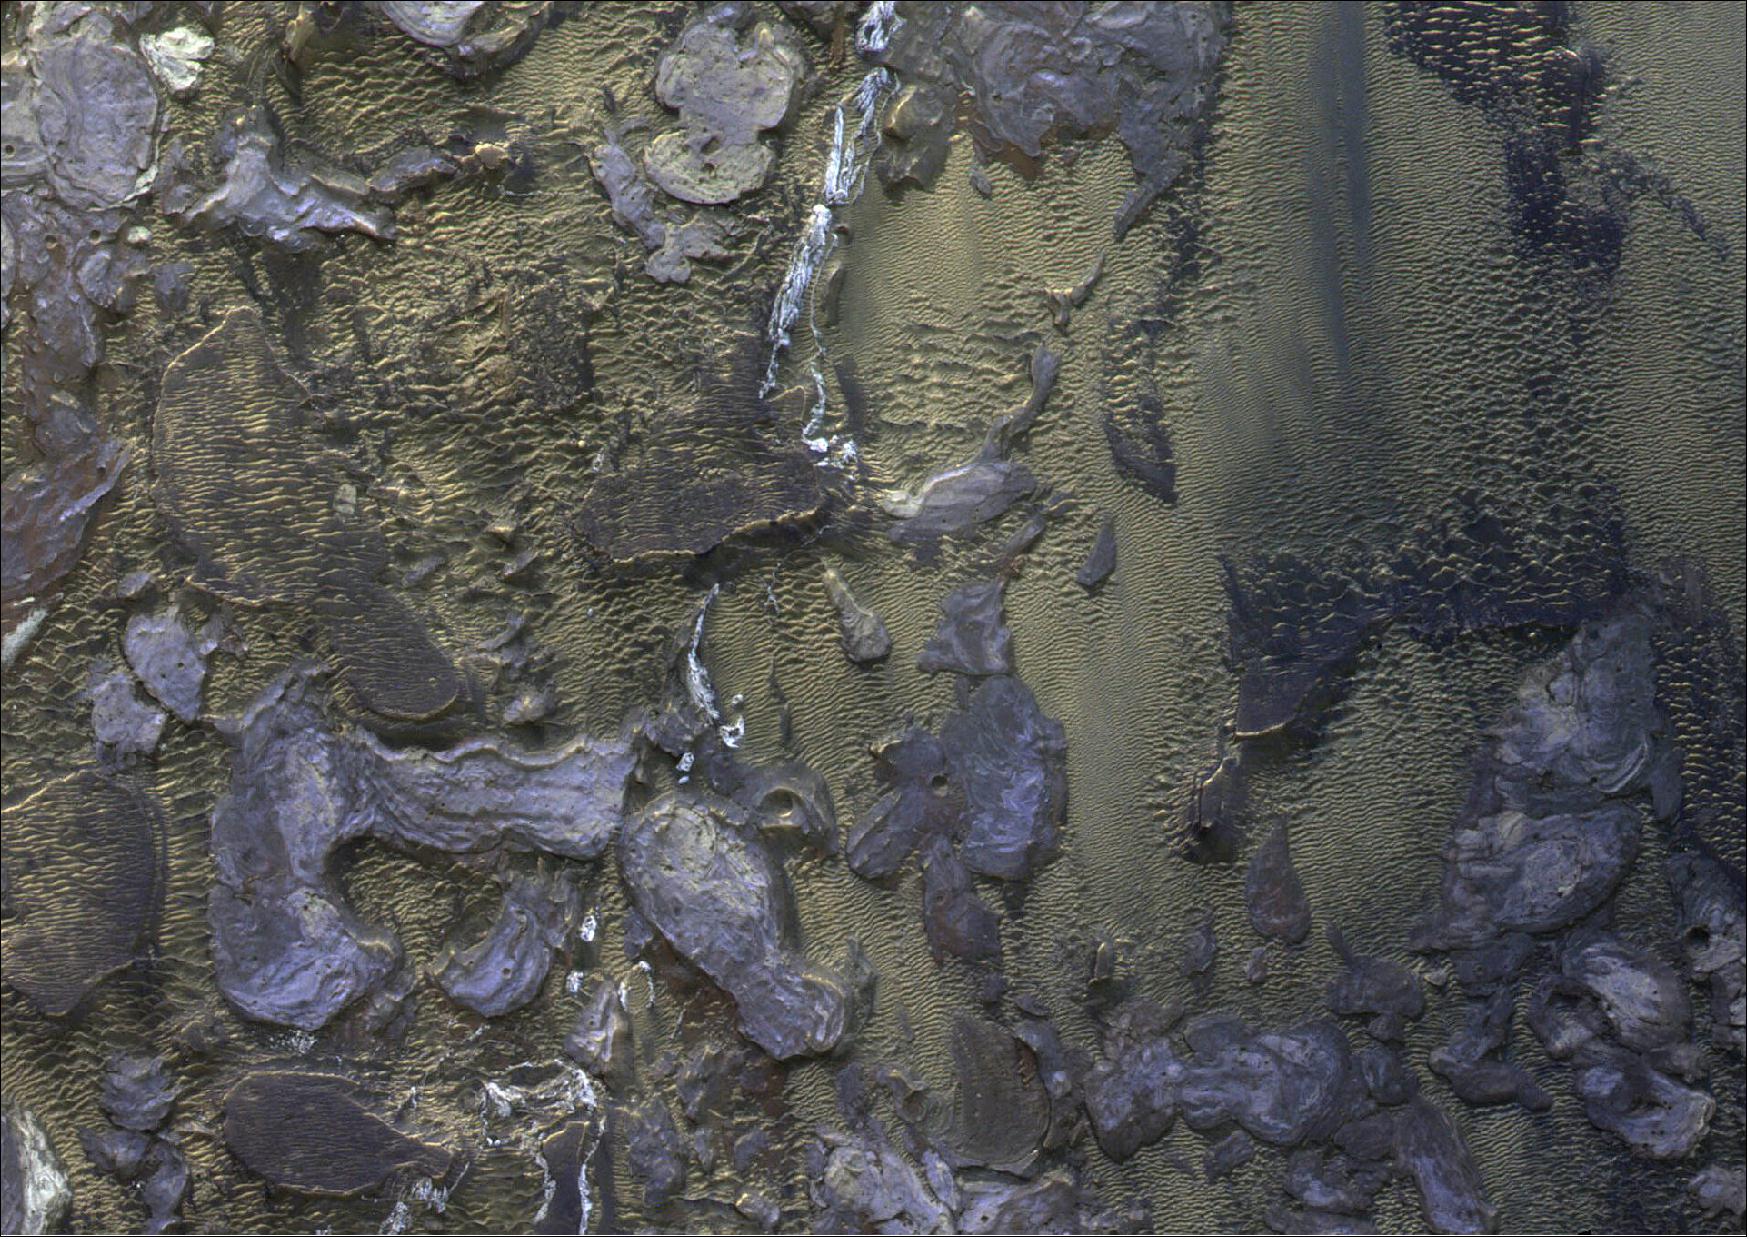 Figure 38: The section seen here is about 5 x 6 km in size. It is a color infrared image (combining the NIR, PAN and BLU filters of CaSSIS), and emphasizes the spectral diversity of landforms and sediments on the surface. It shows details of a blocky deposit on the floor of Melas Chasma that is consistent with an eroded and exposed landslide deposit. Windblown ripples are abundant and interspersed between the blocks. The image was taken on 19 October 2020 and featured on the February 2021 cover of Nature Geoscience (image credit: ESA/Roscosmos/CaSSIS, CC BY-SA 3.0 IGO)